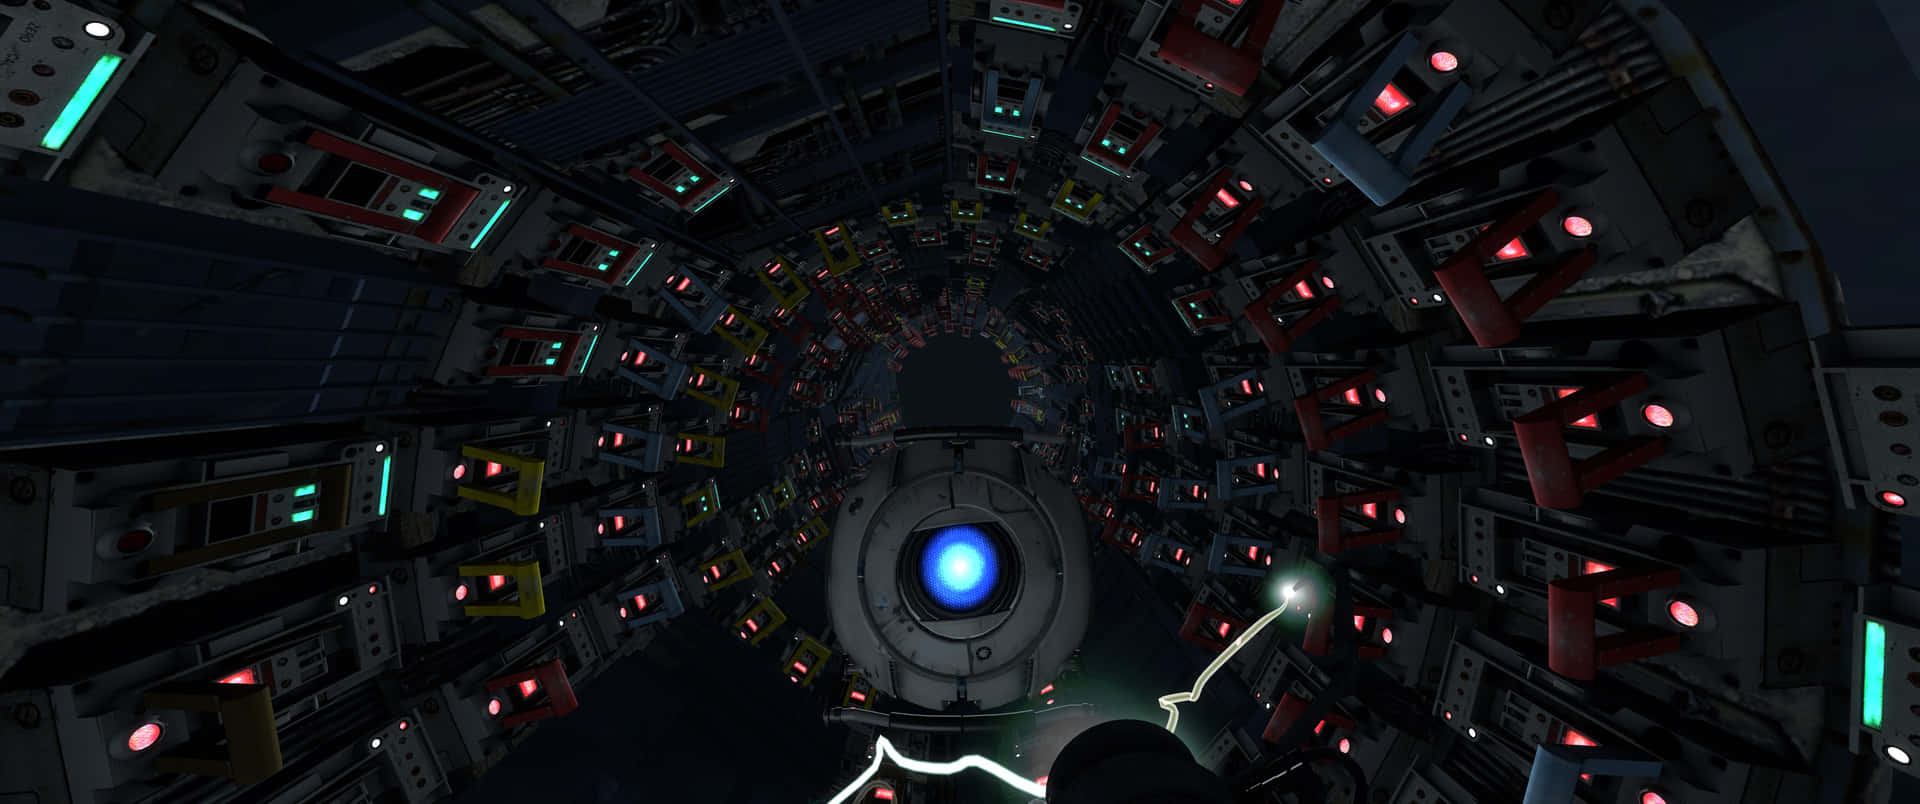 An amazing click of Portal 2 in 3440x1440p resolution